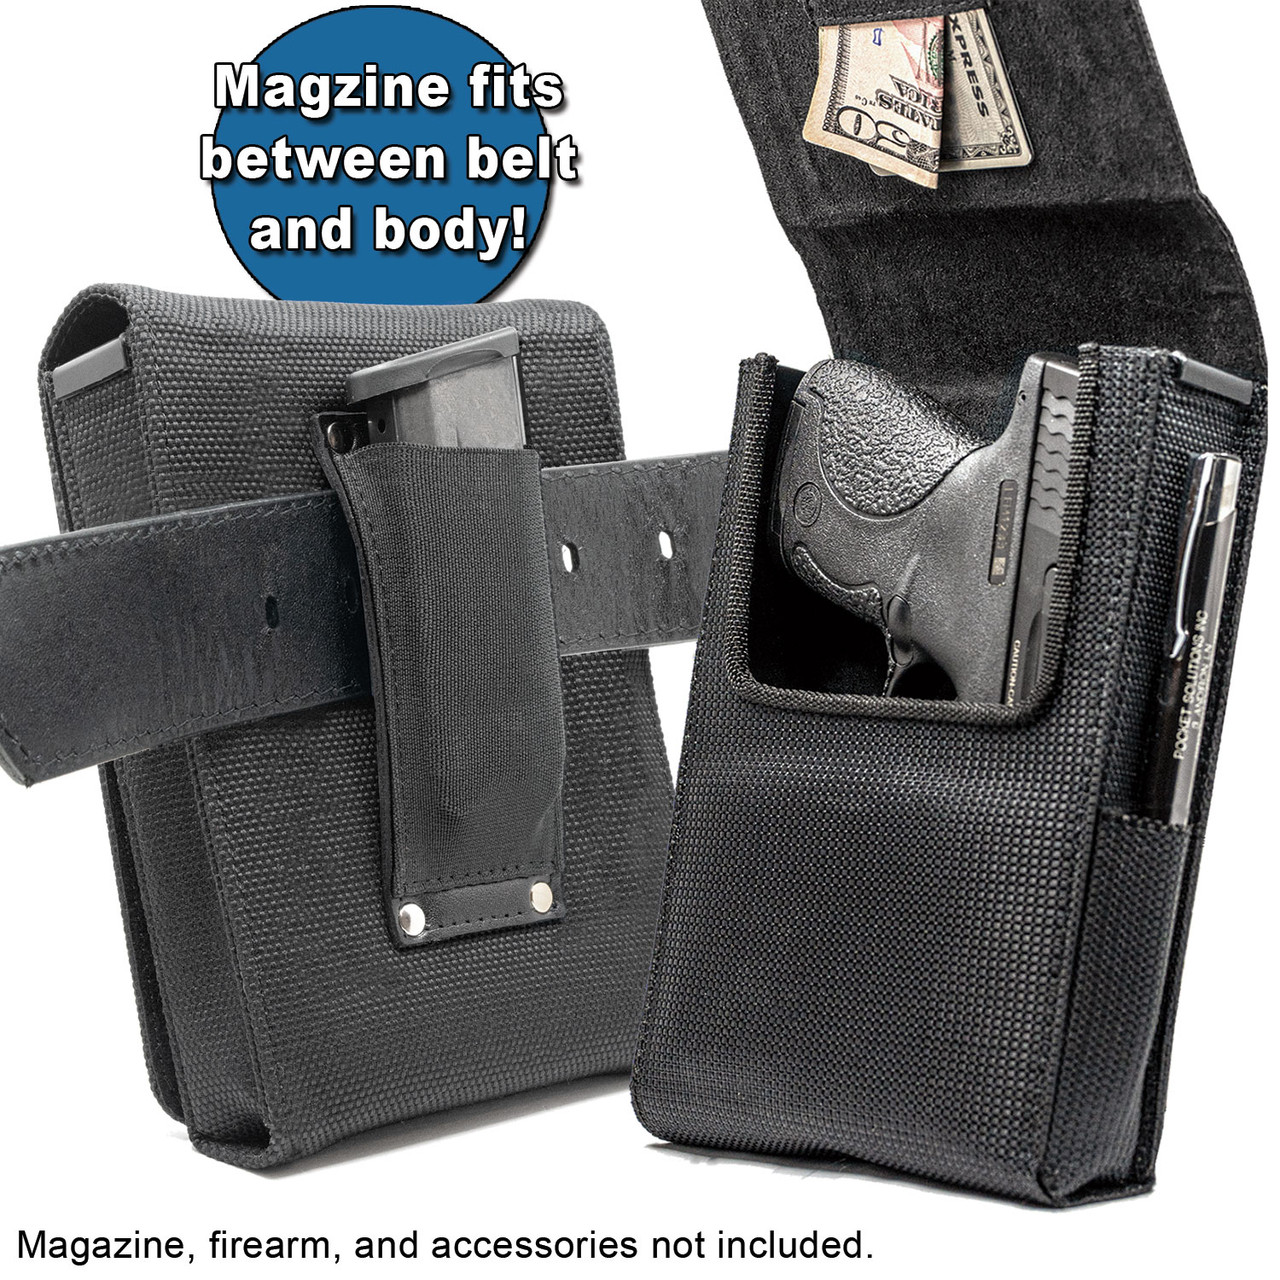 The Springfield Ultra Compact Max Defense Holster